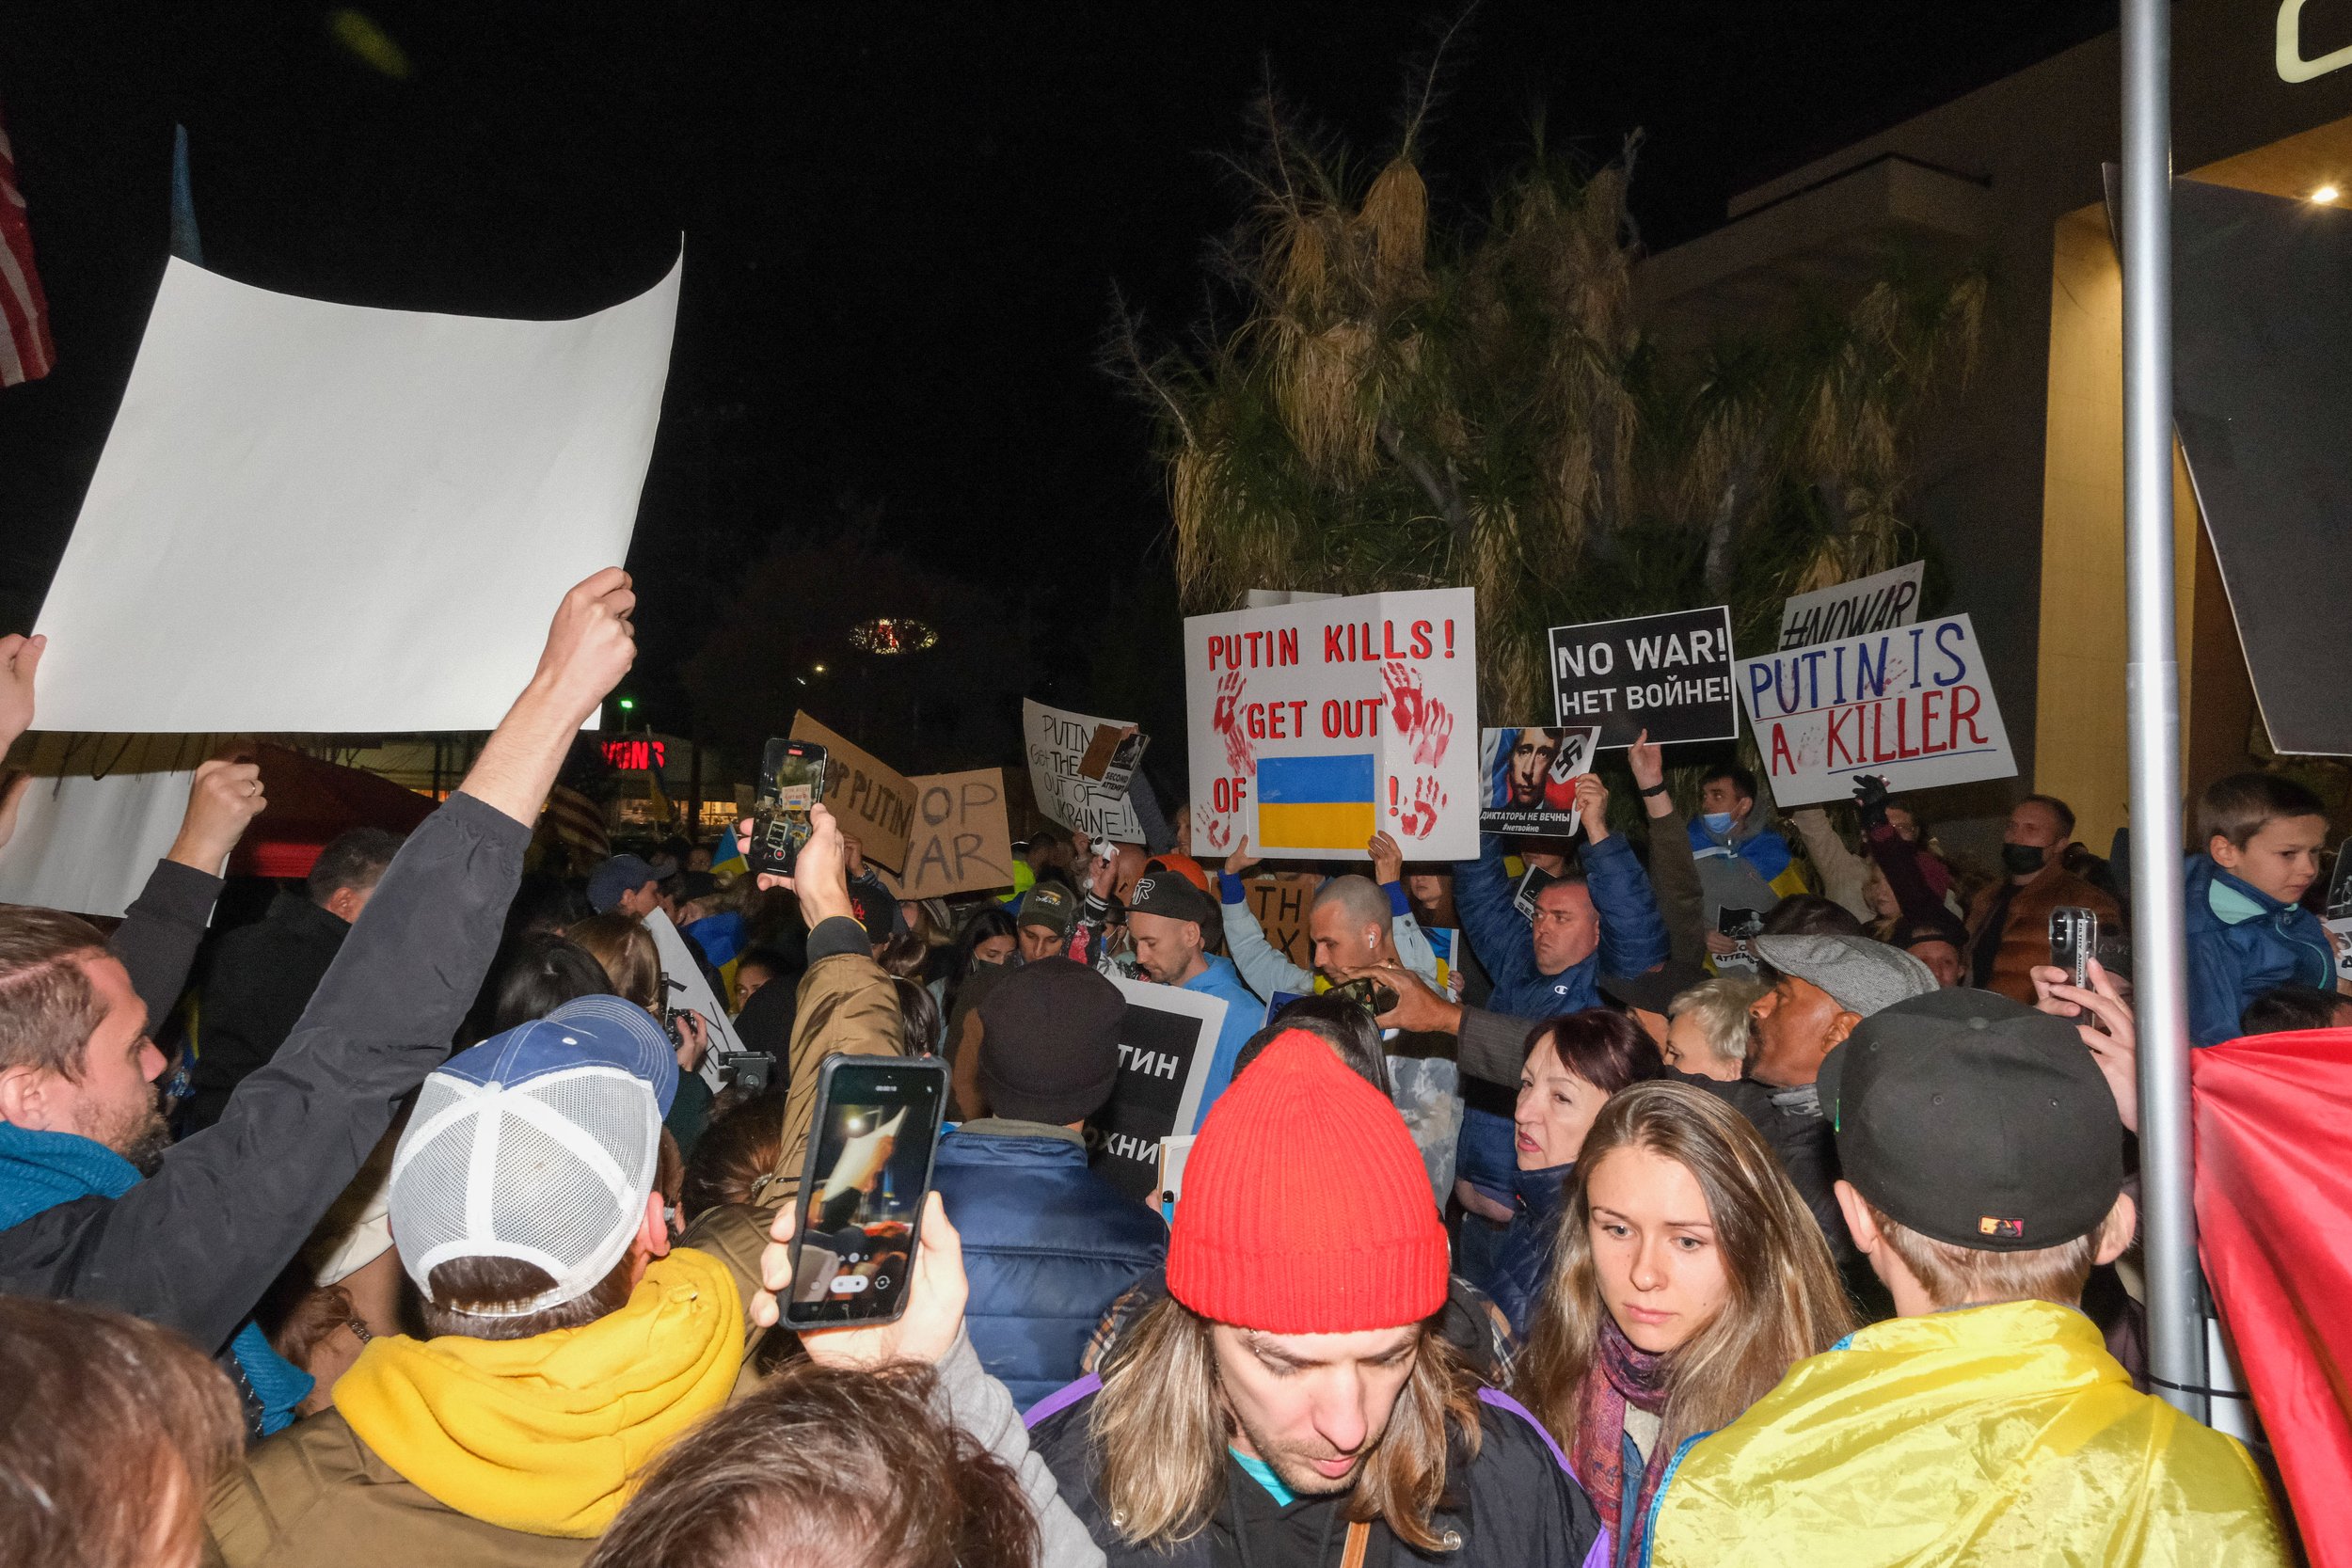  Rally for Ukraine  in Studio City, Los Angeles on Thursday, Feb. 24. A crowd gathers holding signs saying things like ‘Putin is a killer’, ‘Get Putin out of Ukraine’, ‘No War.’  (Anna Sophia Moltke | The Corsair) 